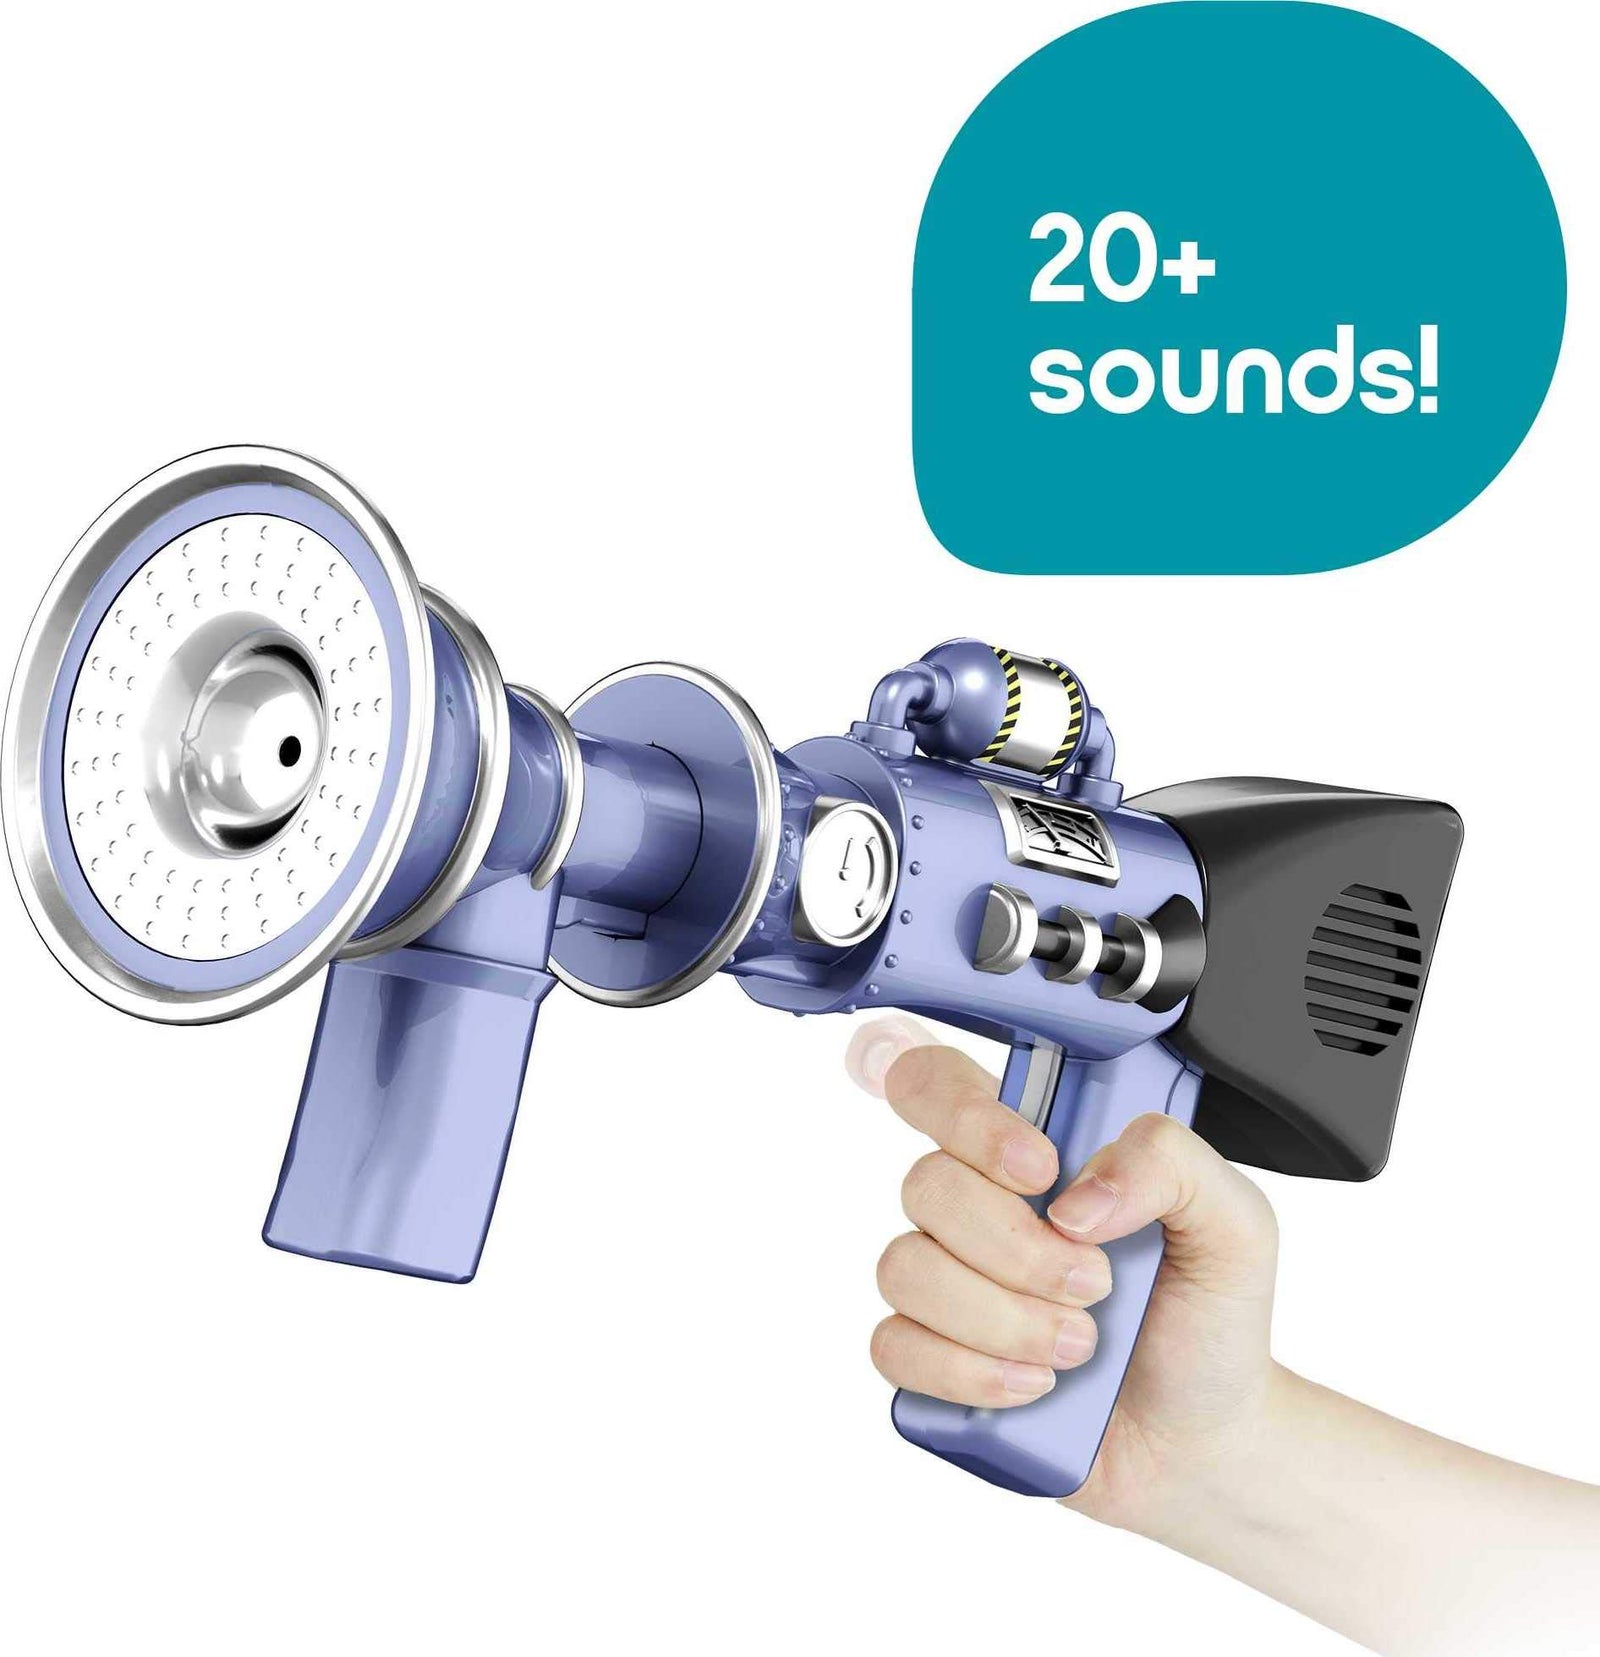 Minions: Fart 'n Fire Super-Size Blaster with 20 Plus Fart Sounds and Realistic Far Mist, Makes a Great Gift for Kids Ages 4 Years and Older